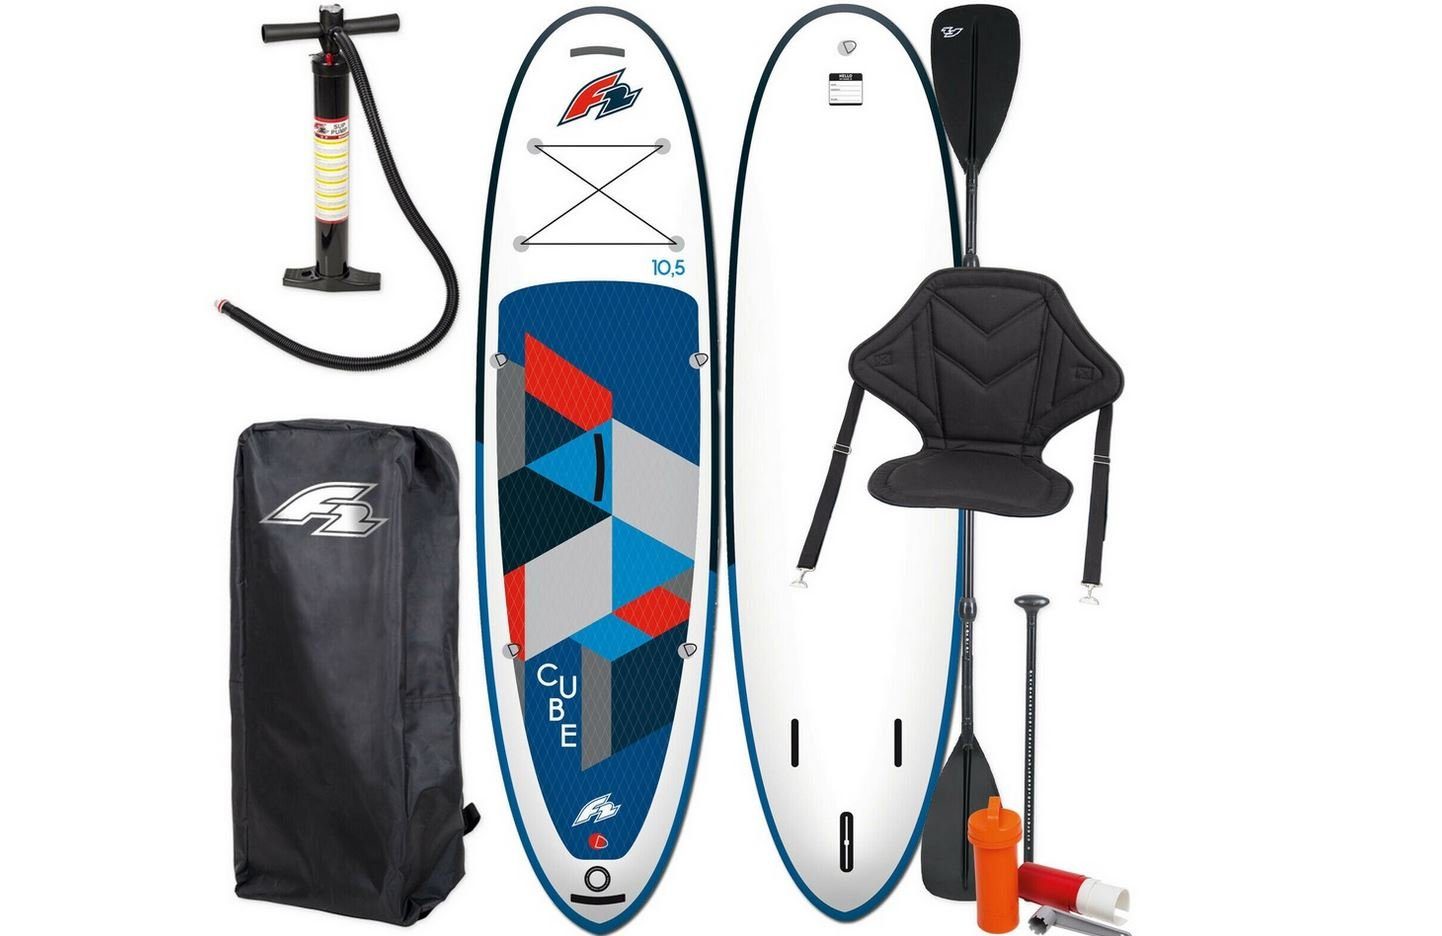 F2 Inflatable SUP-Board »F2 SUP Cube 10,5 Stand Up Paddle Board Kajak Set«  online kaufen | OTTO